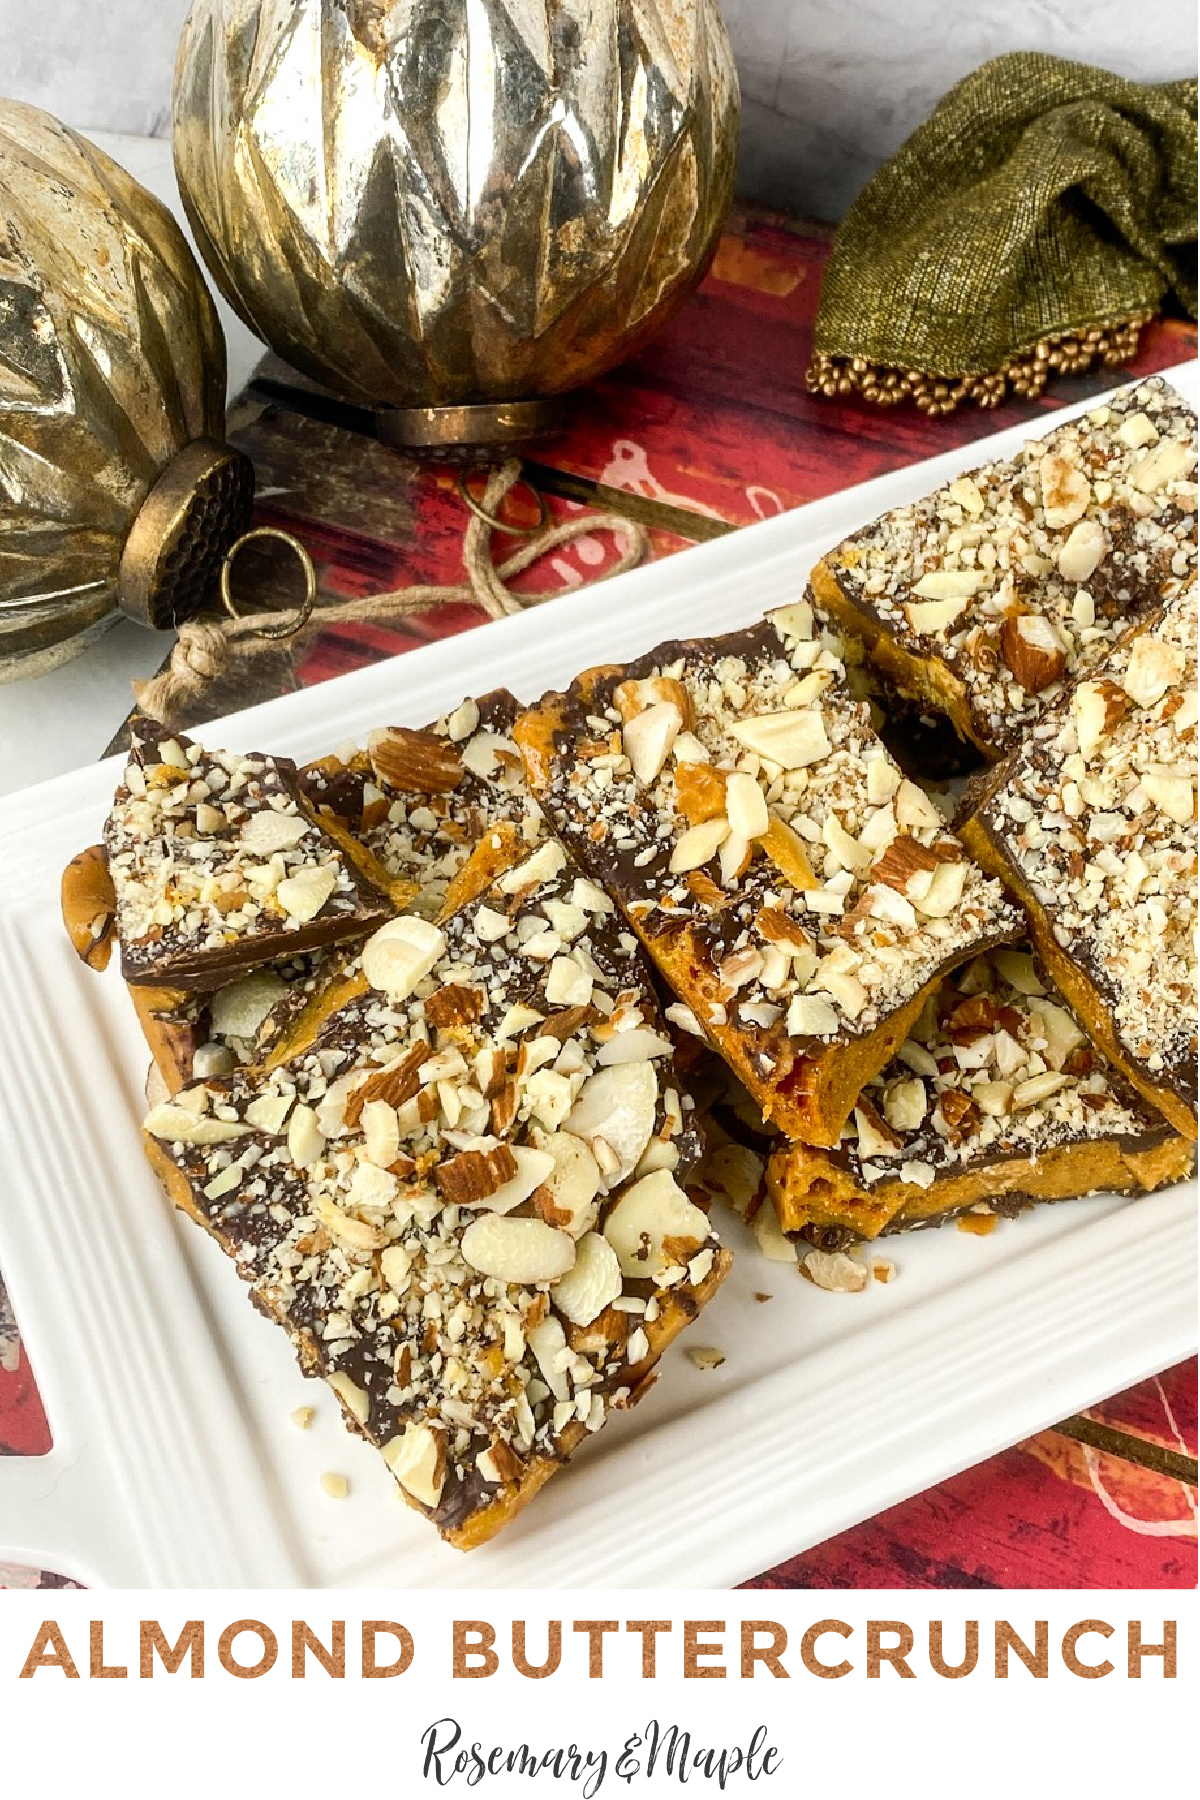 Almond Buttercrunch Candy recipe featuring homemade Honeycomb and loads of chocolate and almonds. It's an addictive holiday treat!